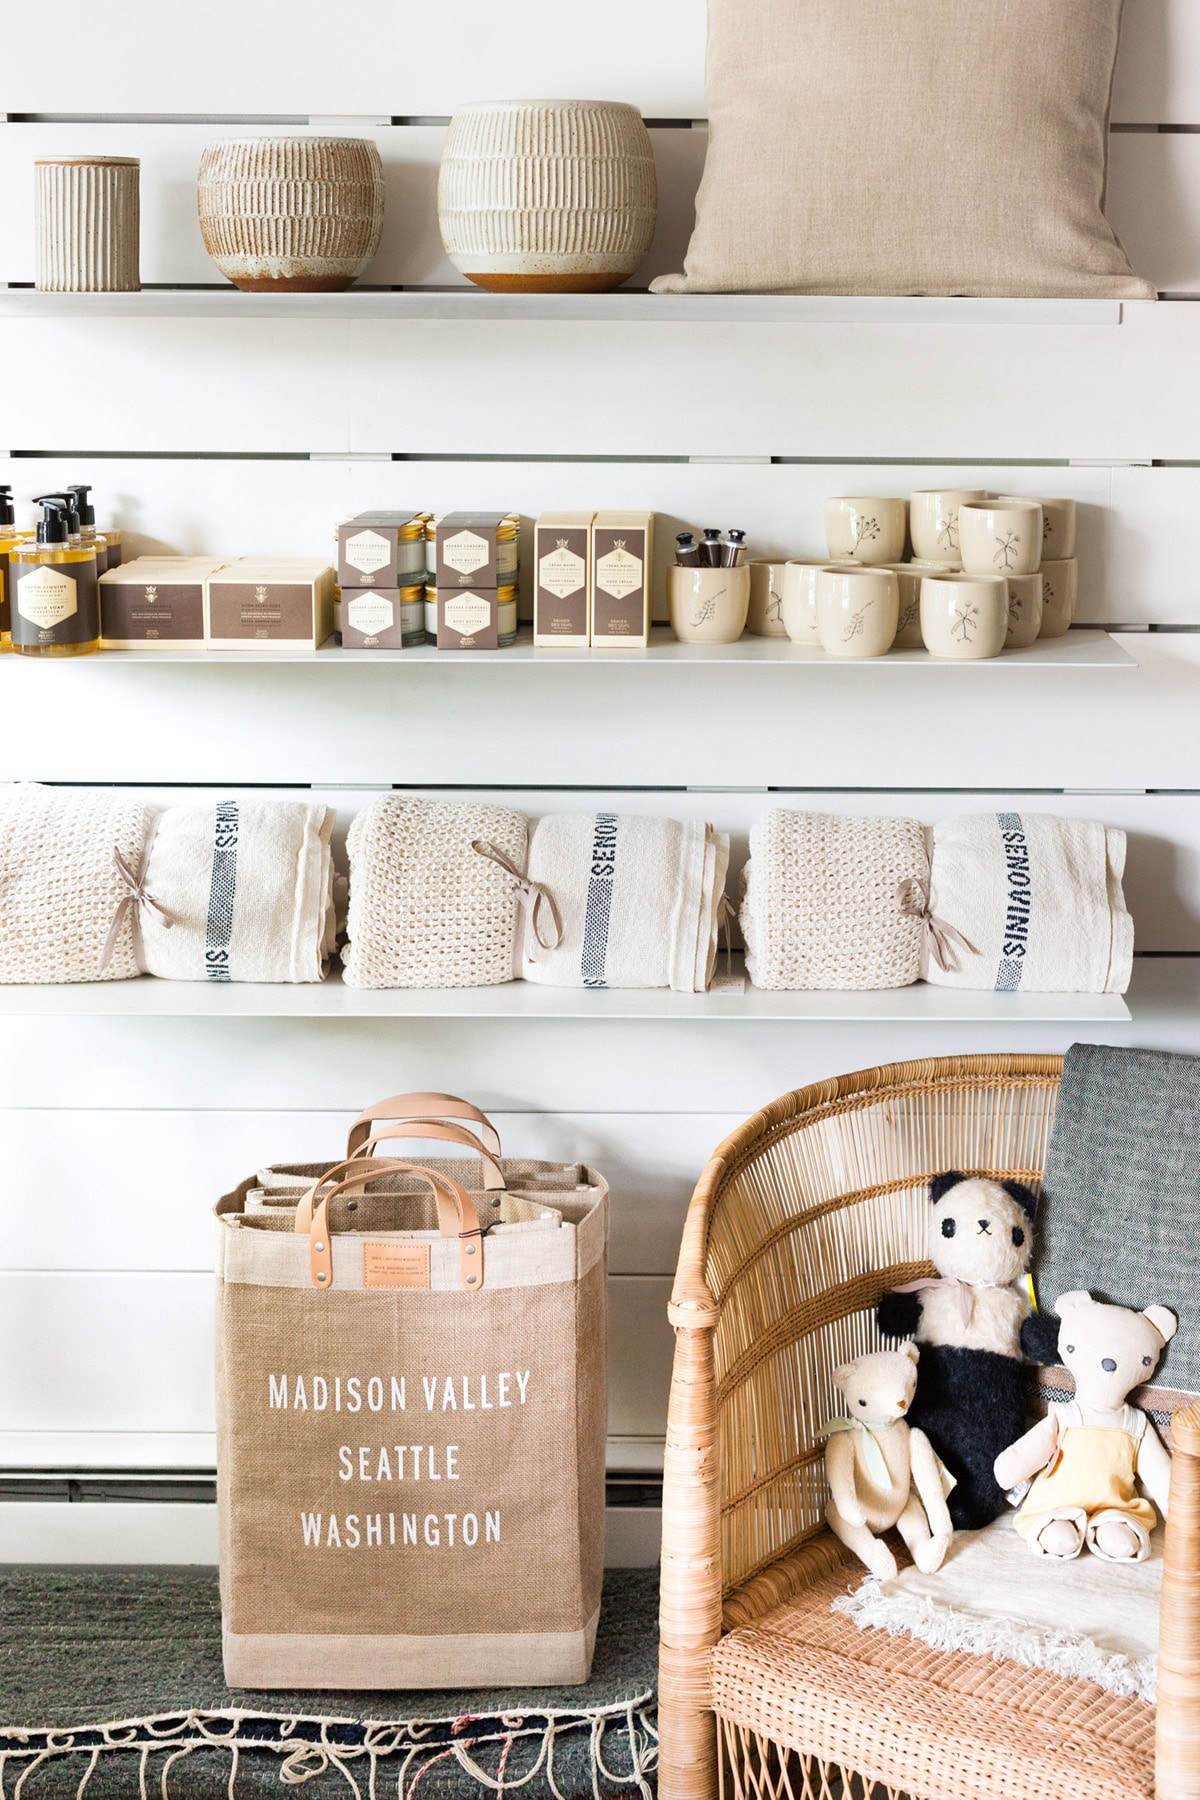 salt house mercantile in madison valley | seattle shopping guide on coco kelley